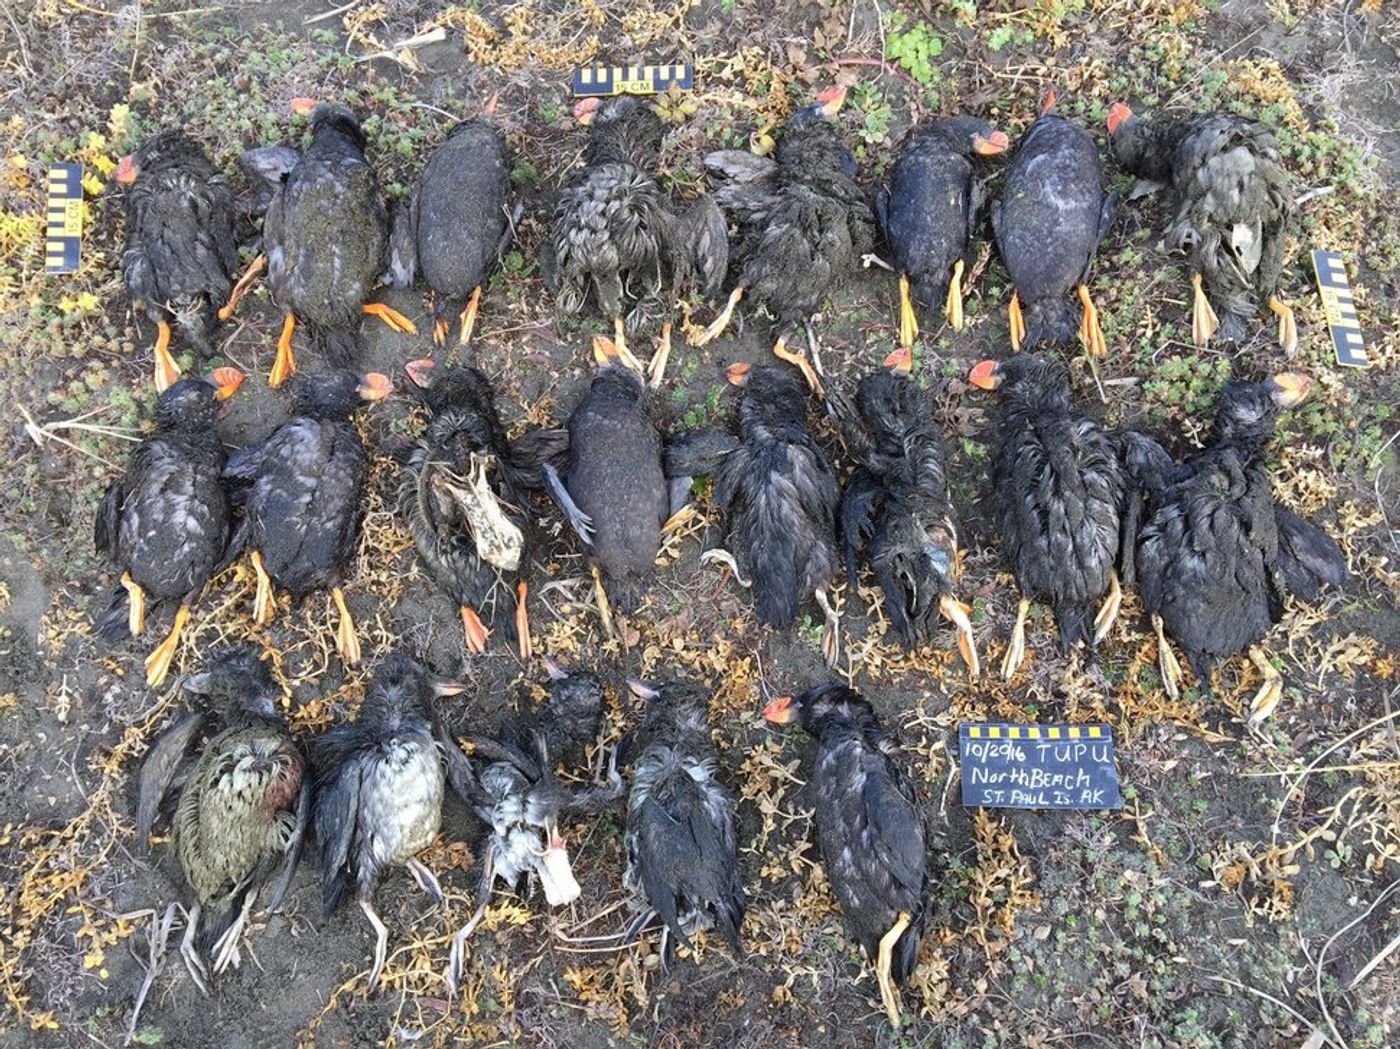 Some of the puffins found dead in St. Paul this October. Photo: Paul Melovidov